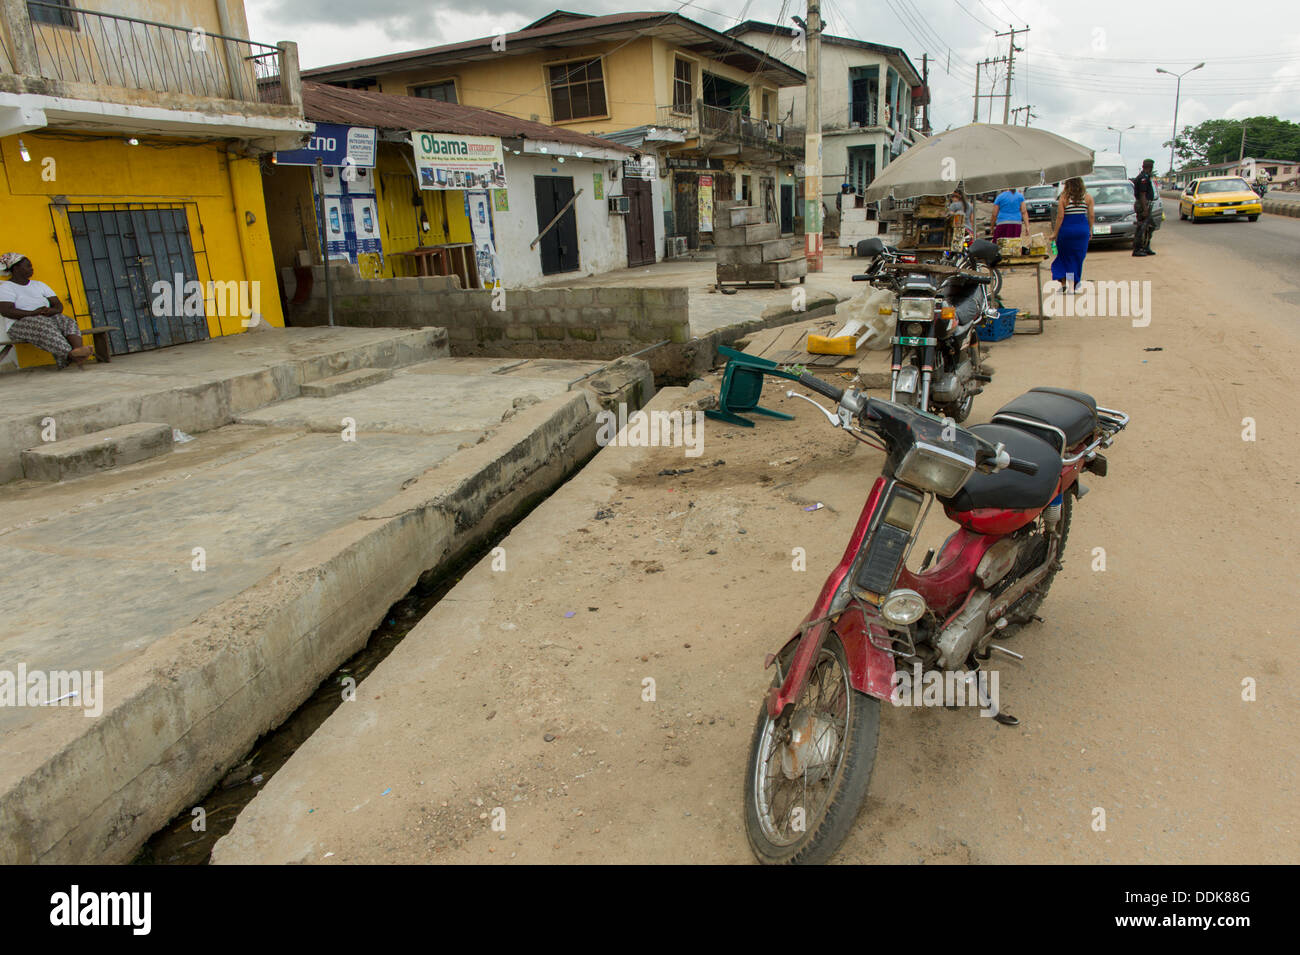 Motorcycles parked on a commercial street in Lokoja, Nigeria Stock Photo